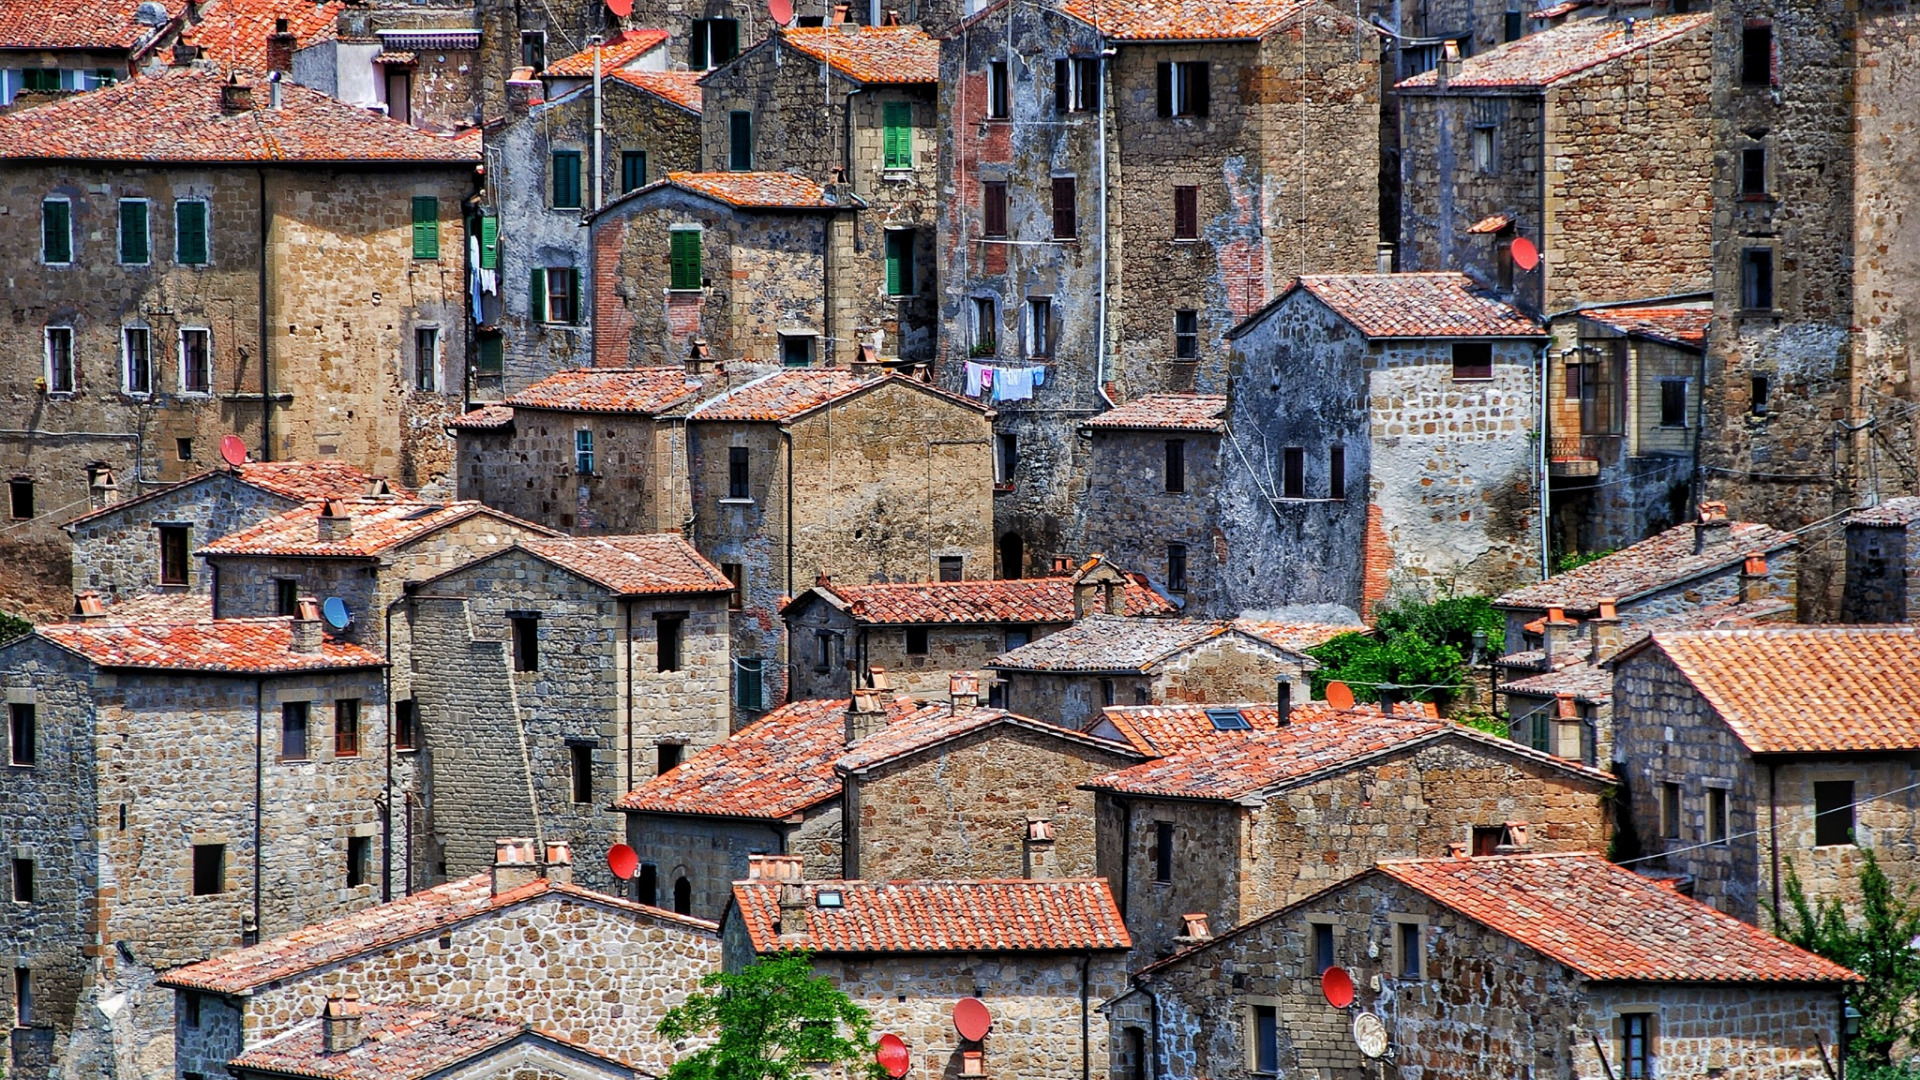 Architecture Building City Cityscape Sorano Italy Medieval House Old Building Window Rooftops Rural 1920x1080